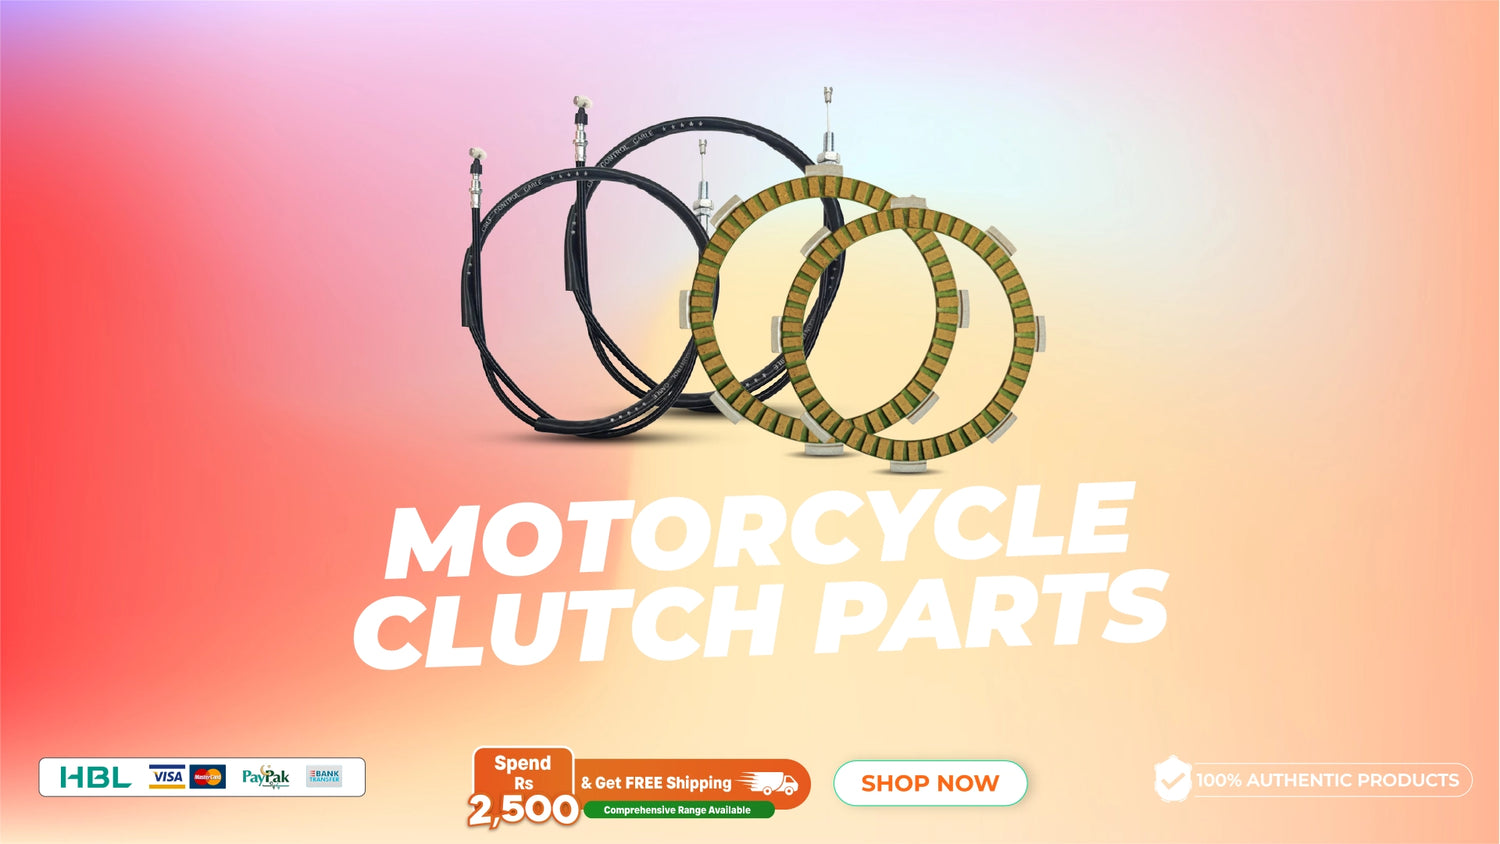 Crown Motorcycle Clutch Parts